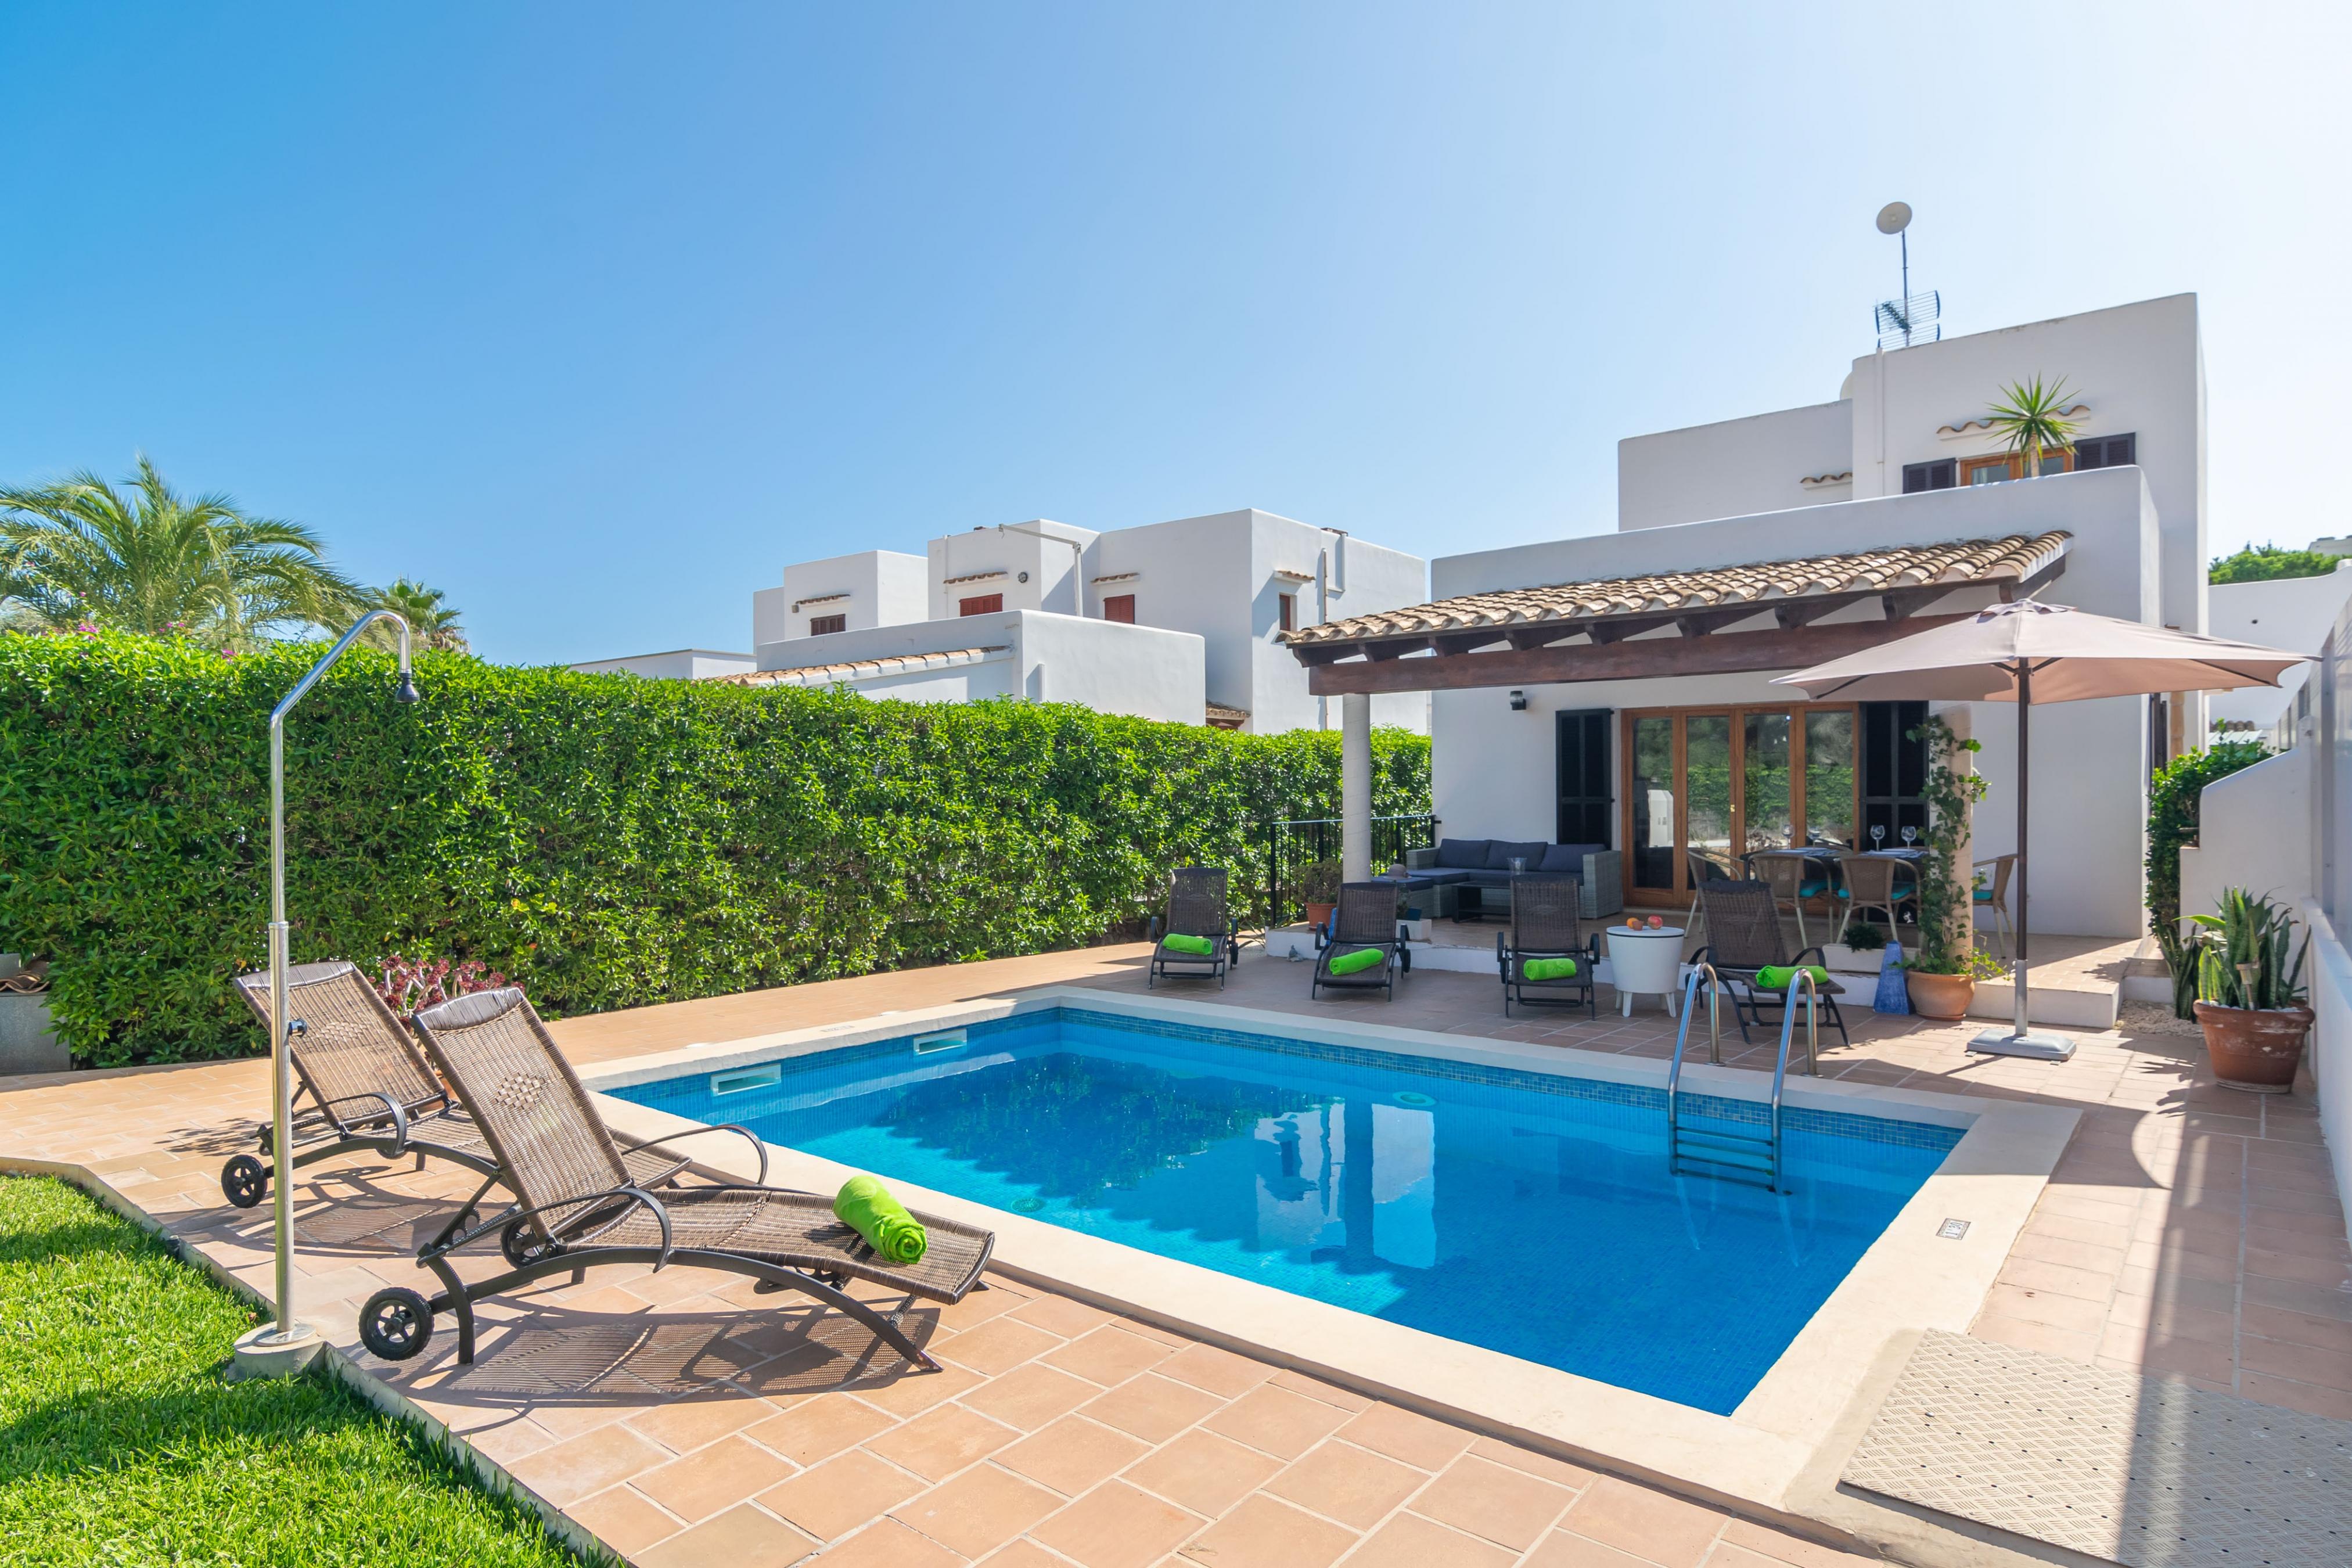 Property Image 1 - CASA HECTOR - Villa with private pool in Cala d’Or. Free WiFi